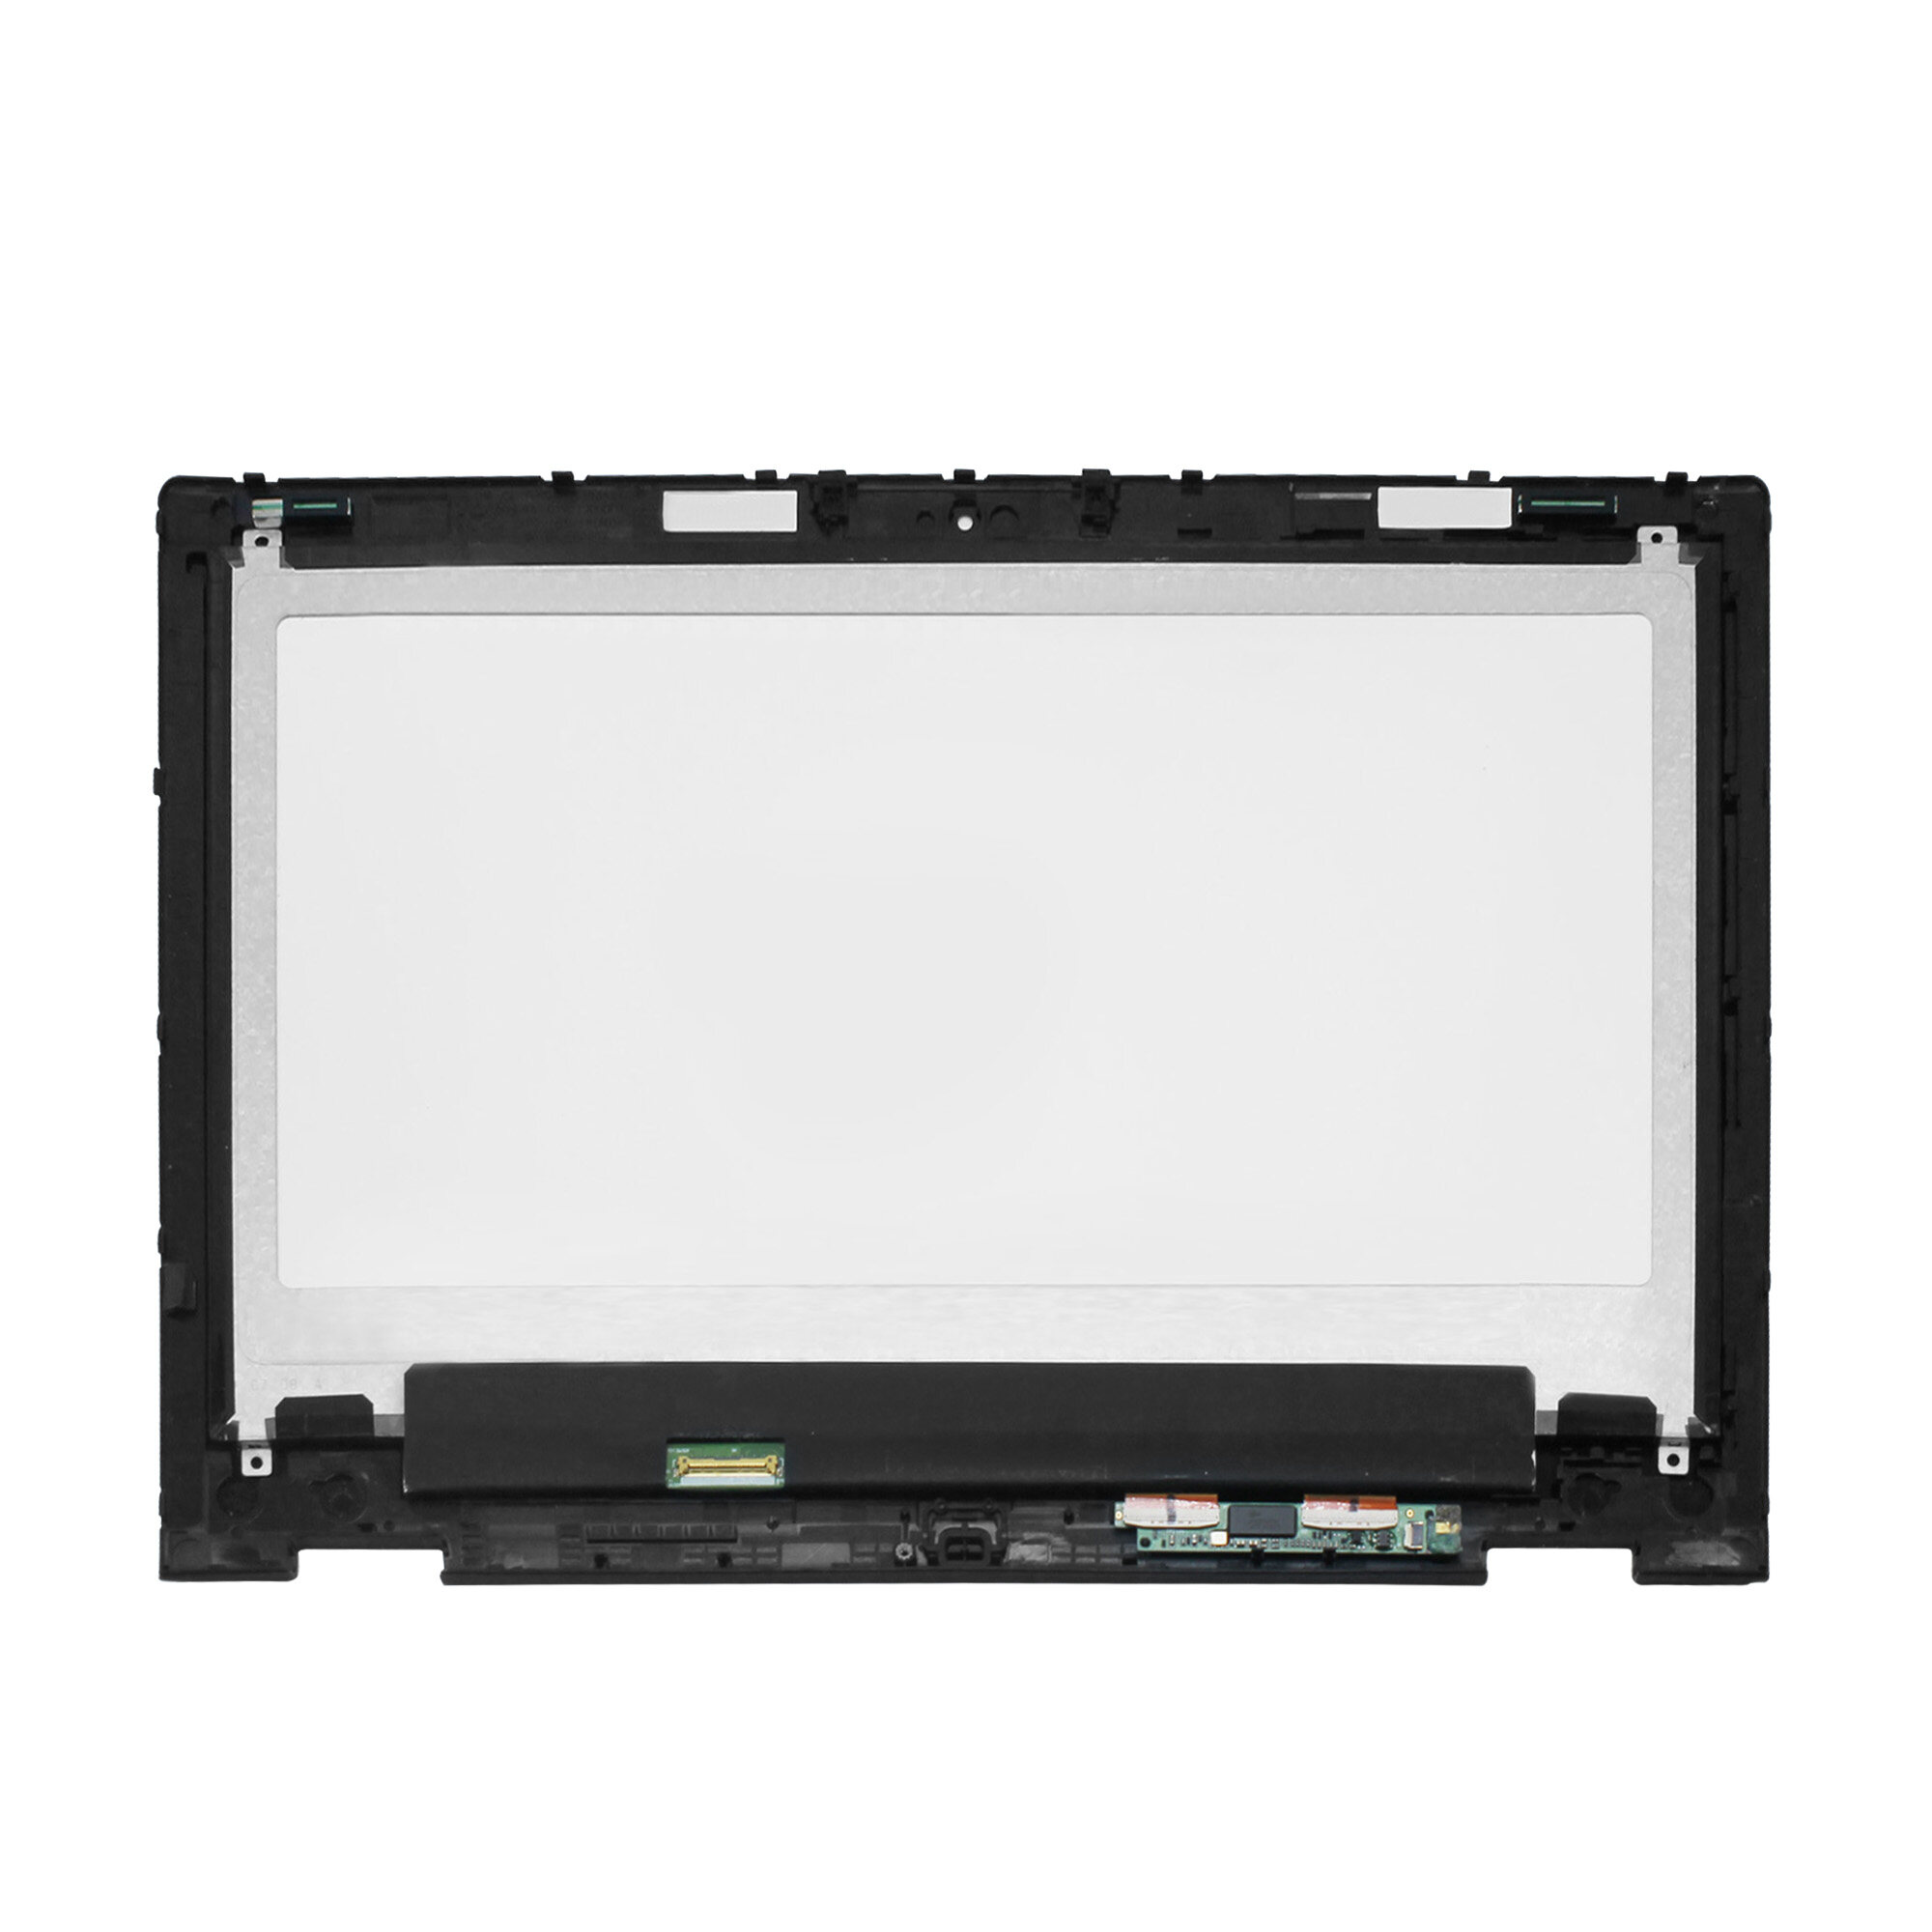 13.3" LED LCD Touch Screen Digitizer Assembly Bezel For Dell Inspiron 13 DP/N: YD4WJ